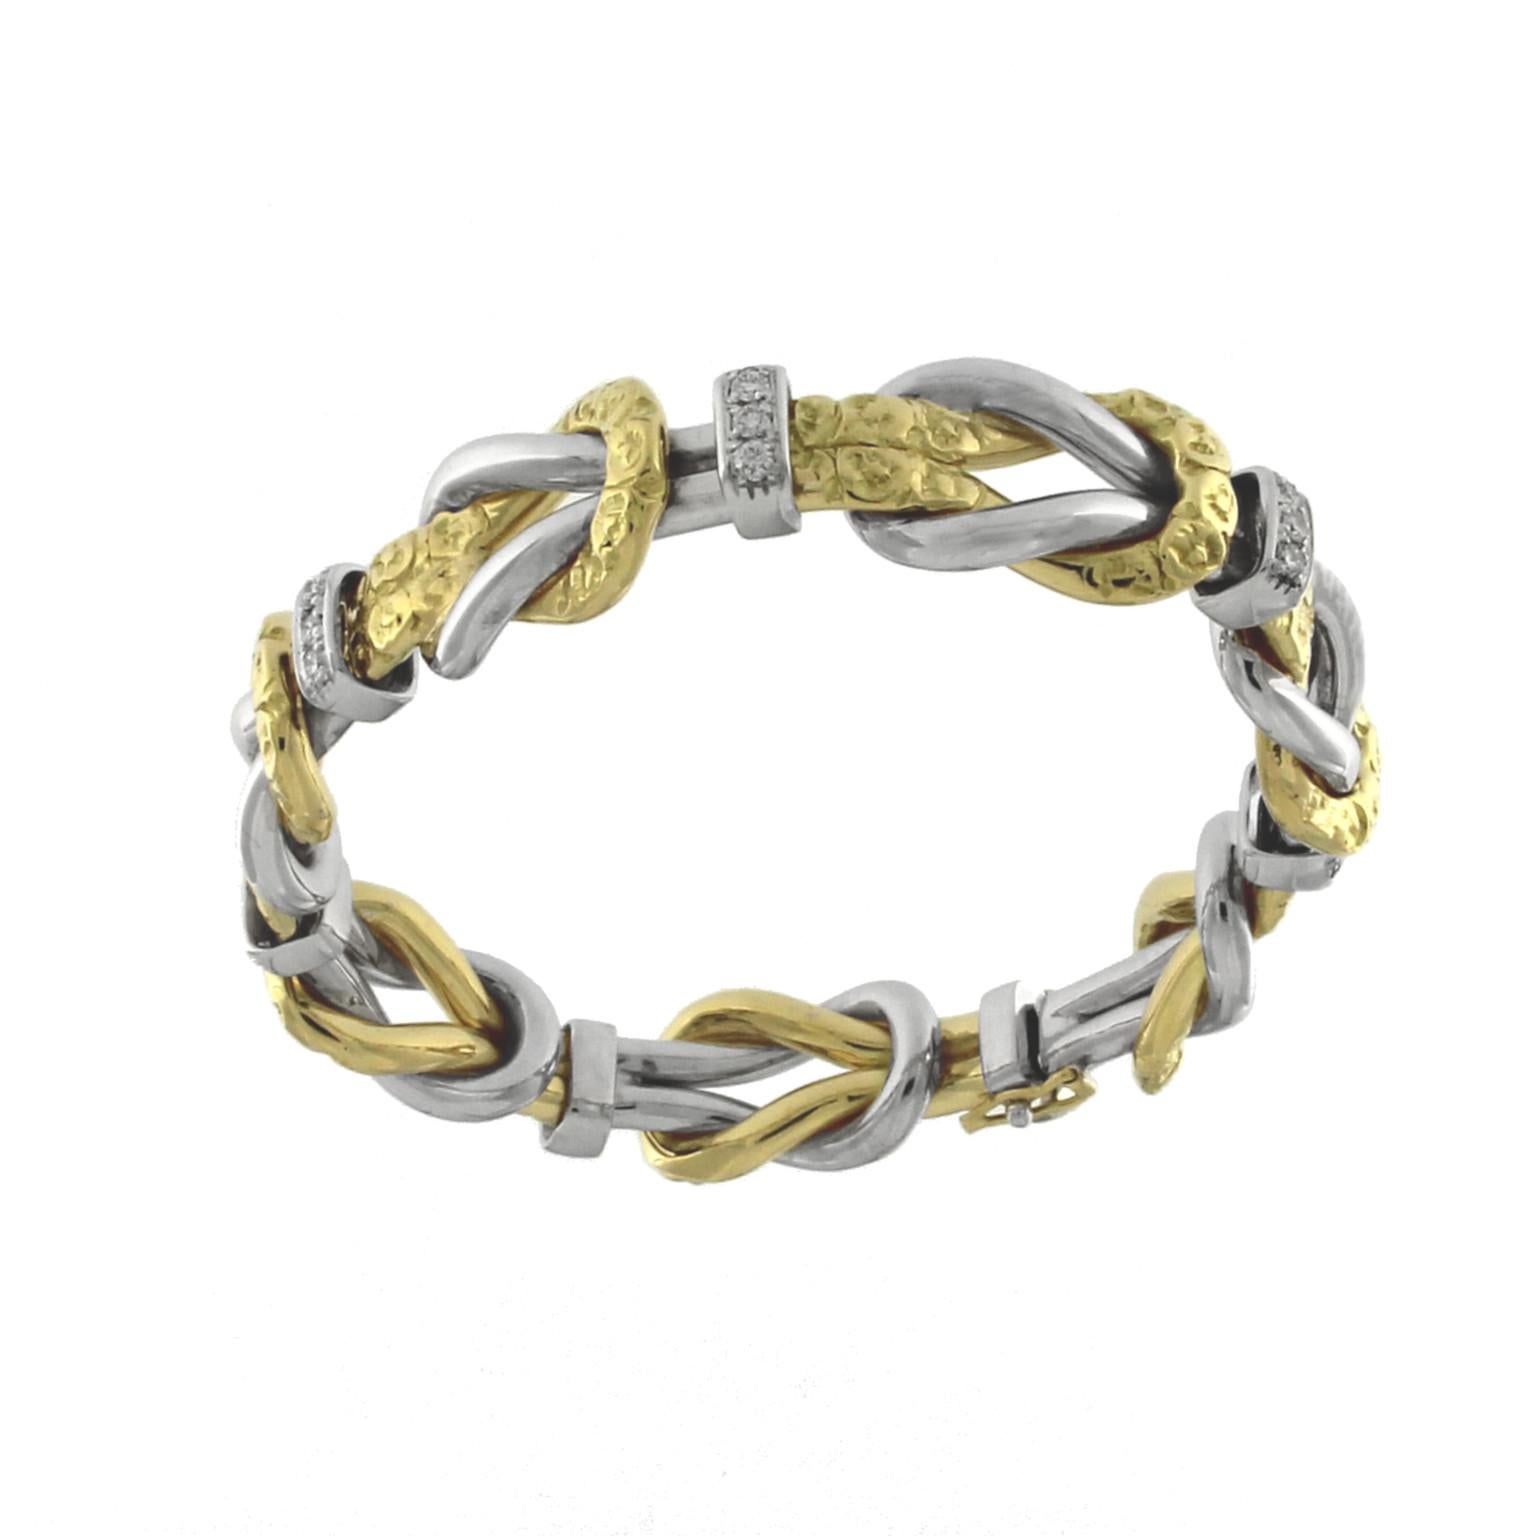 Brilliant Cut Chiselled Bracelet Yellow and White 18 Karat and Diamonds For Sale